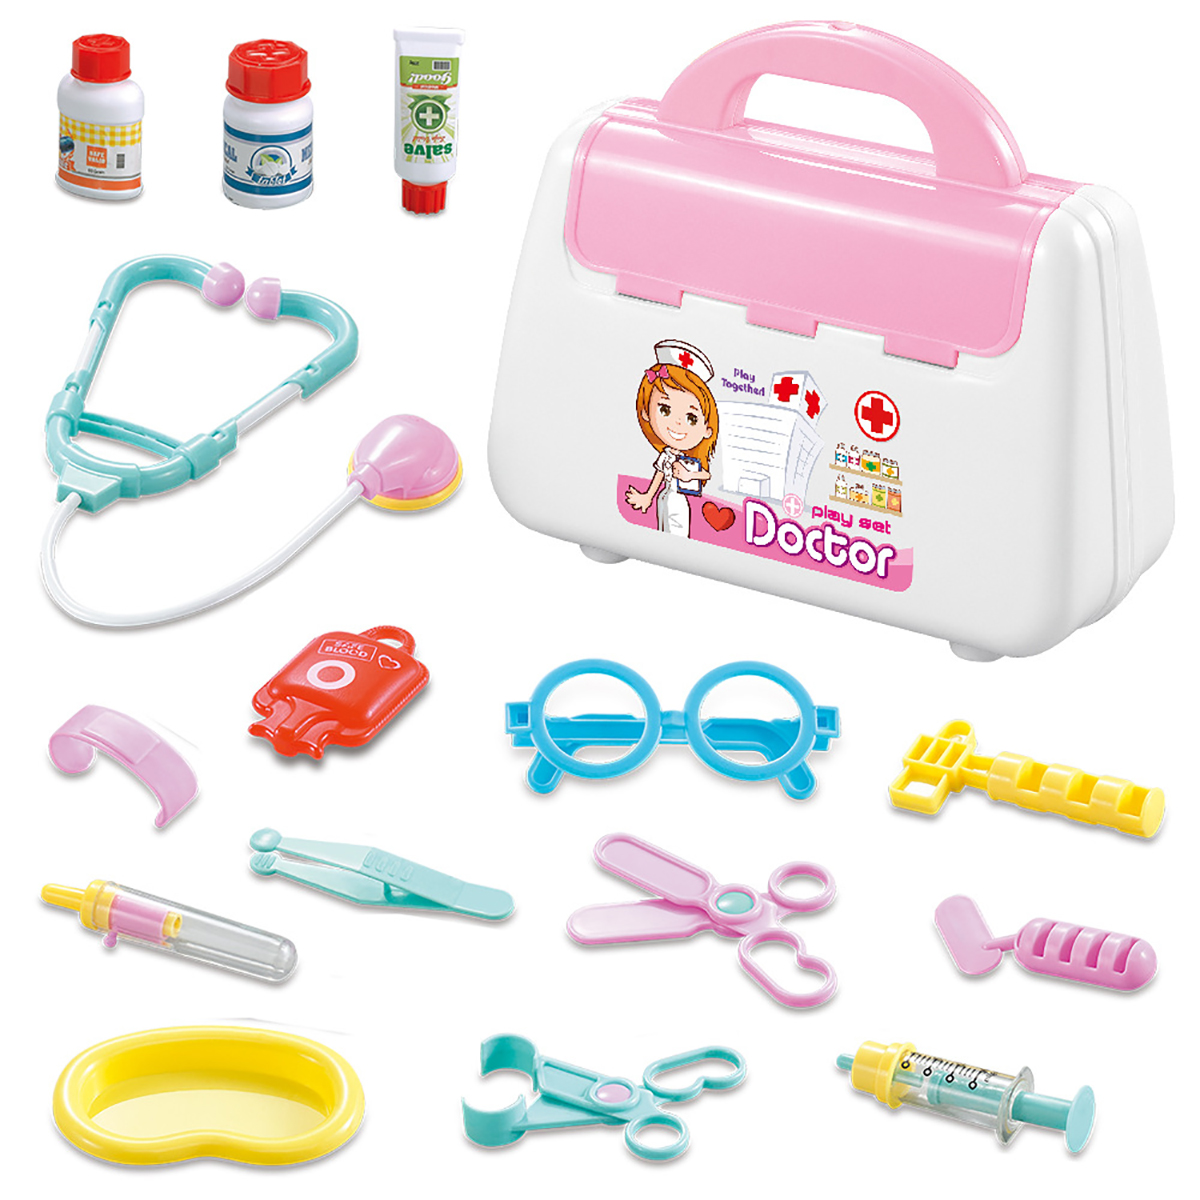 Simulation-Pretend-Doctor-Nurse-Role-Play-Education-Toy-Set-with-Carrying-Box-for-Kids-Gift-1725291-9